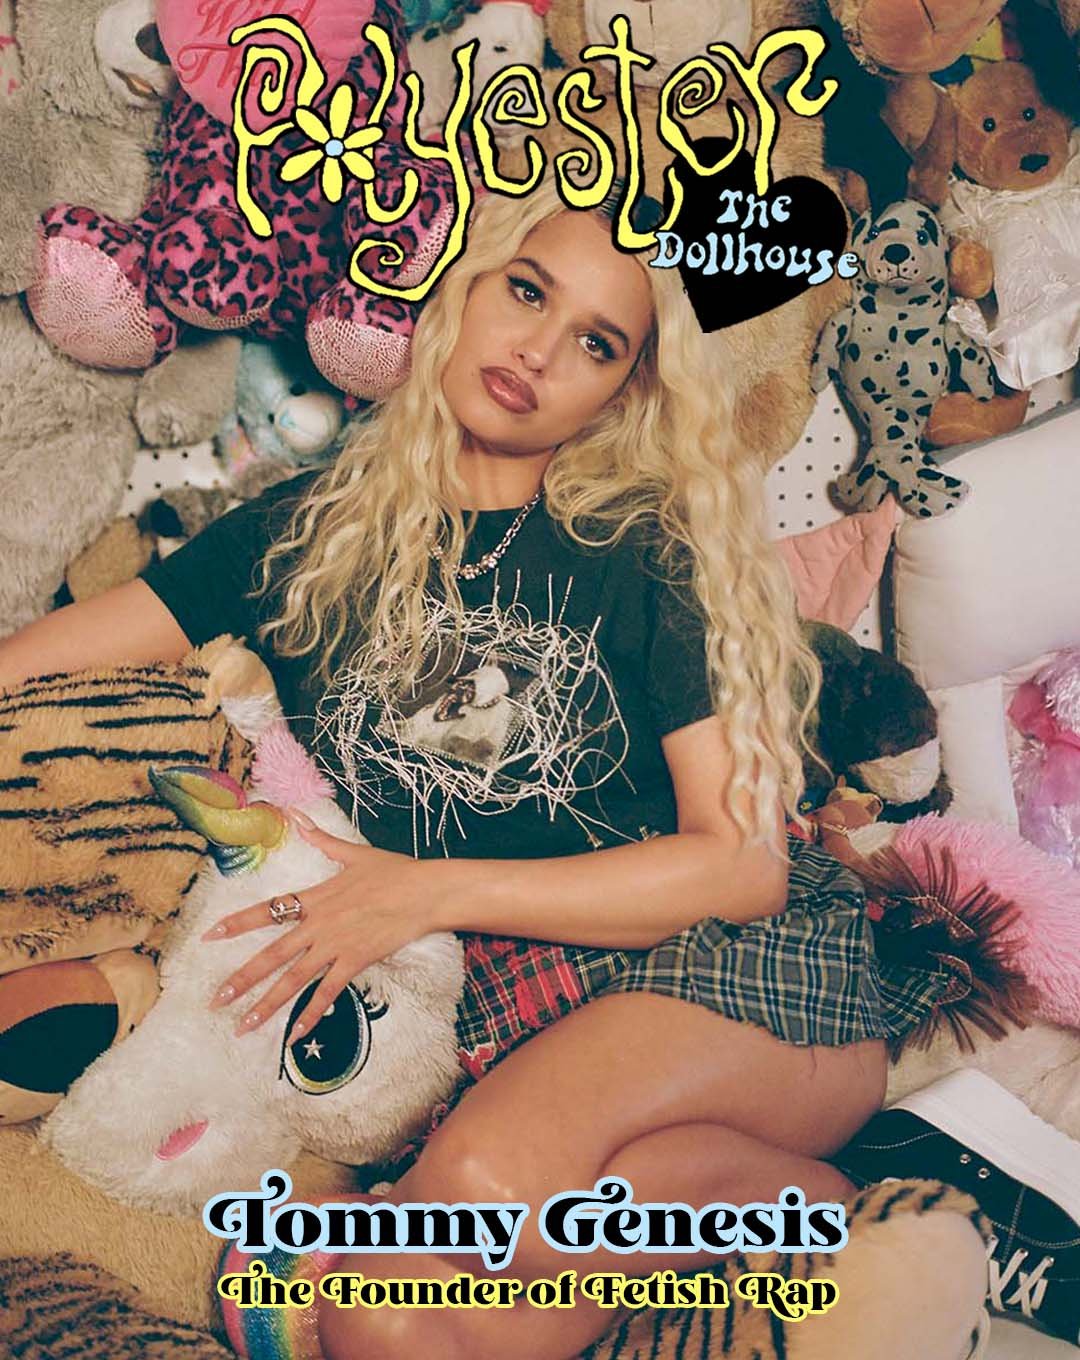 TOMMY GENESIS FOR POLYESTER MAG